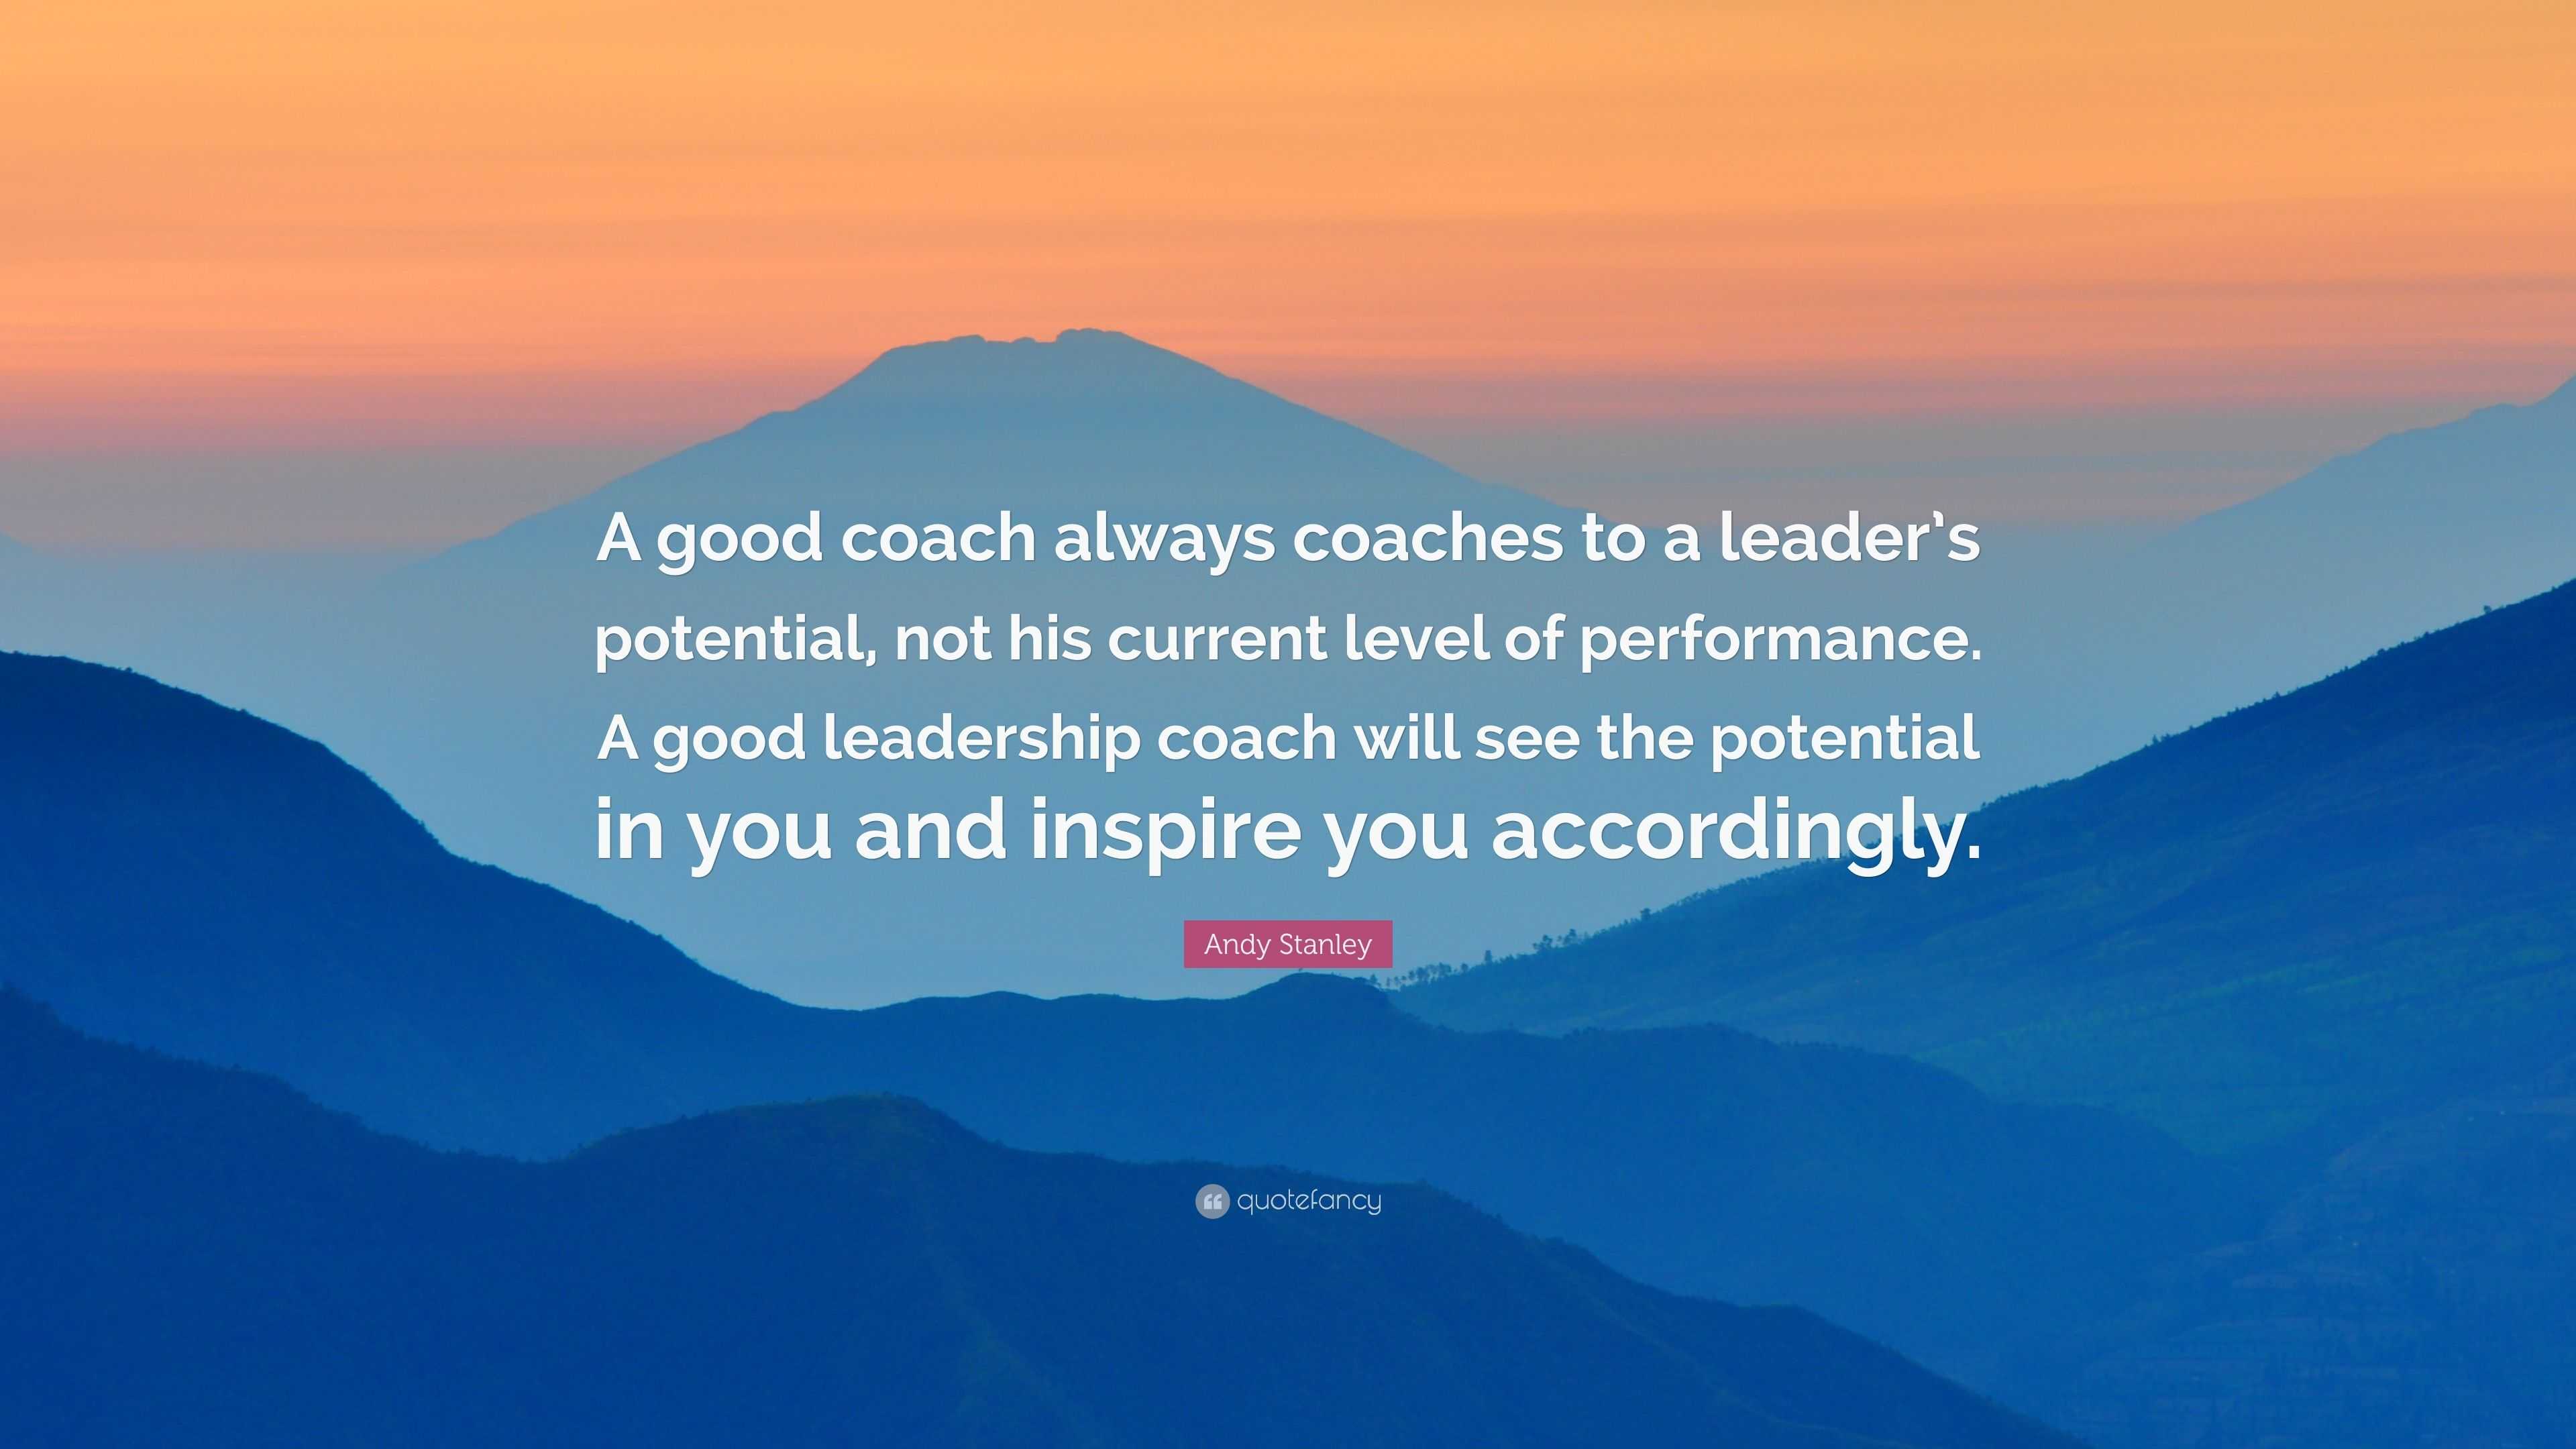 What Is A Great Coach Quotes - Soccer Coaching Motivational Quotes